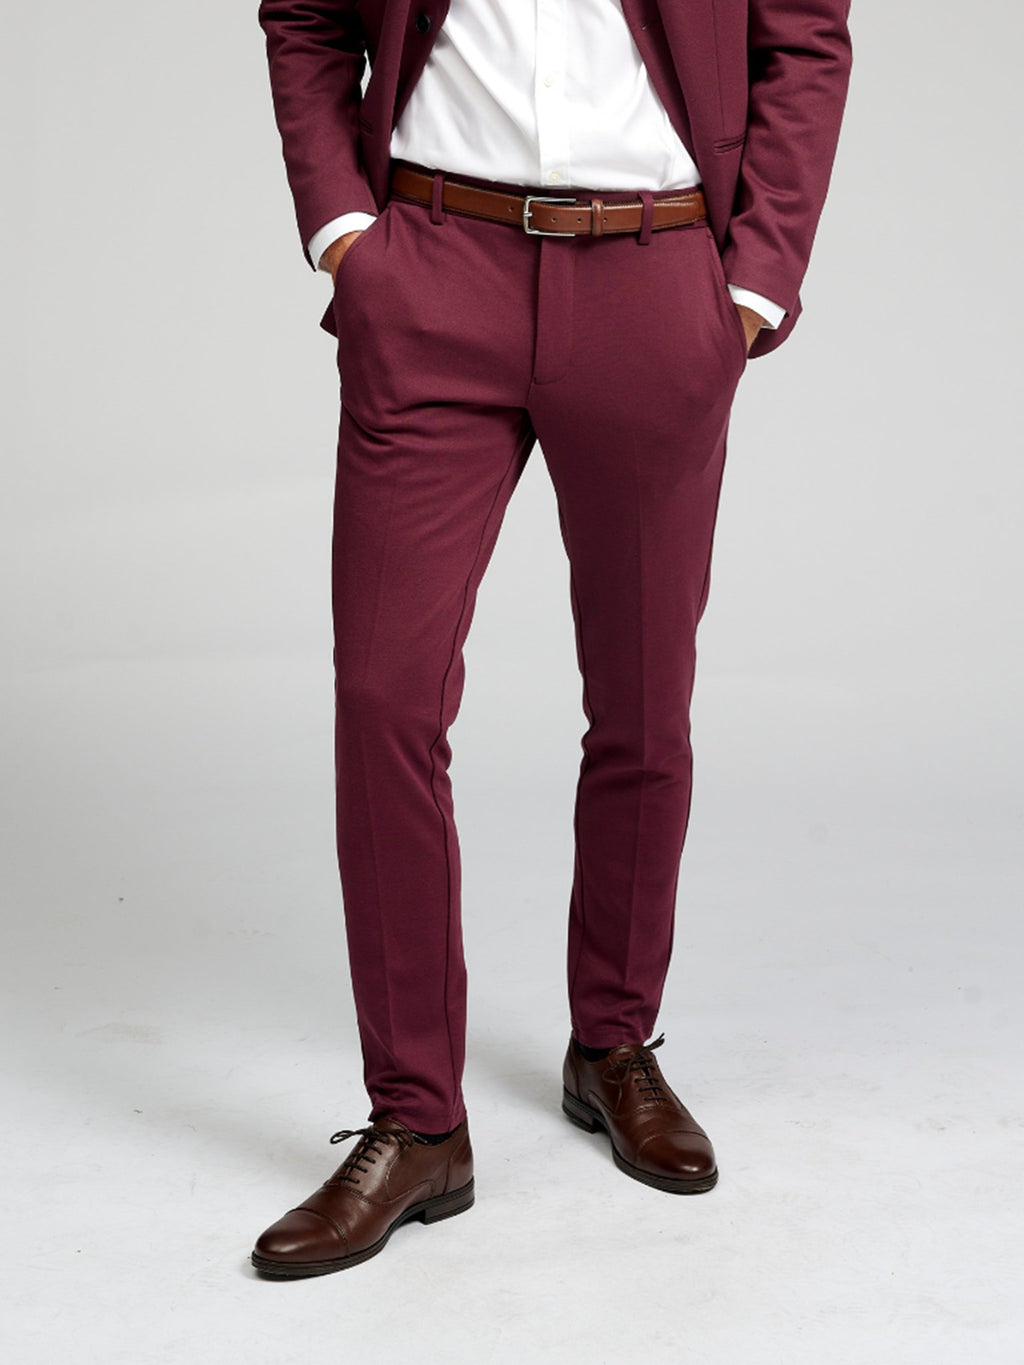 The Original Performance Suit™️ (Burgundy) - Package Deal